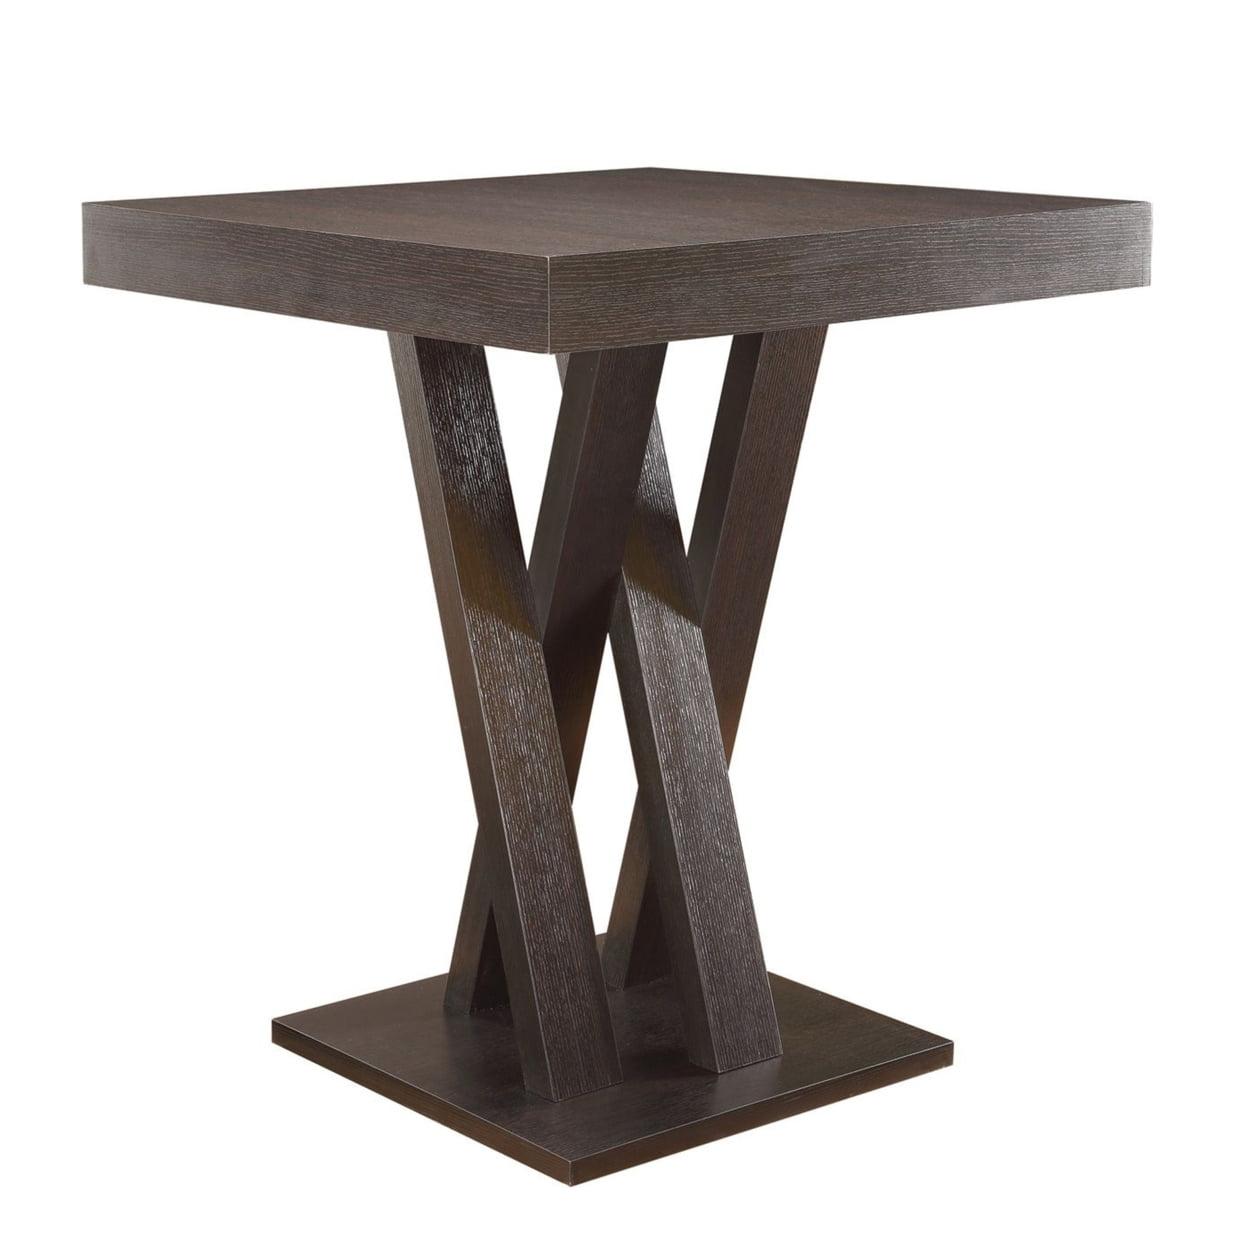 Modern Cappuccino Square Counter-Height Dining Table with Crisscross Base